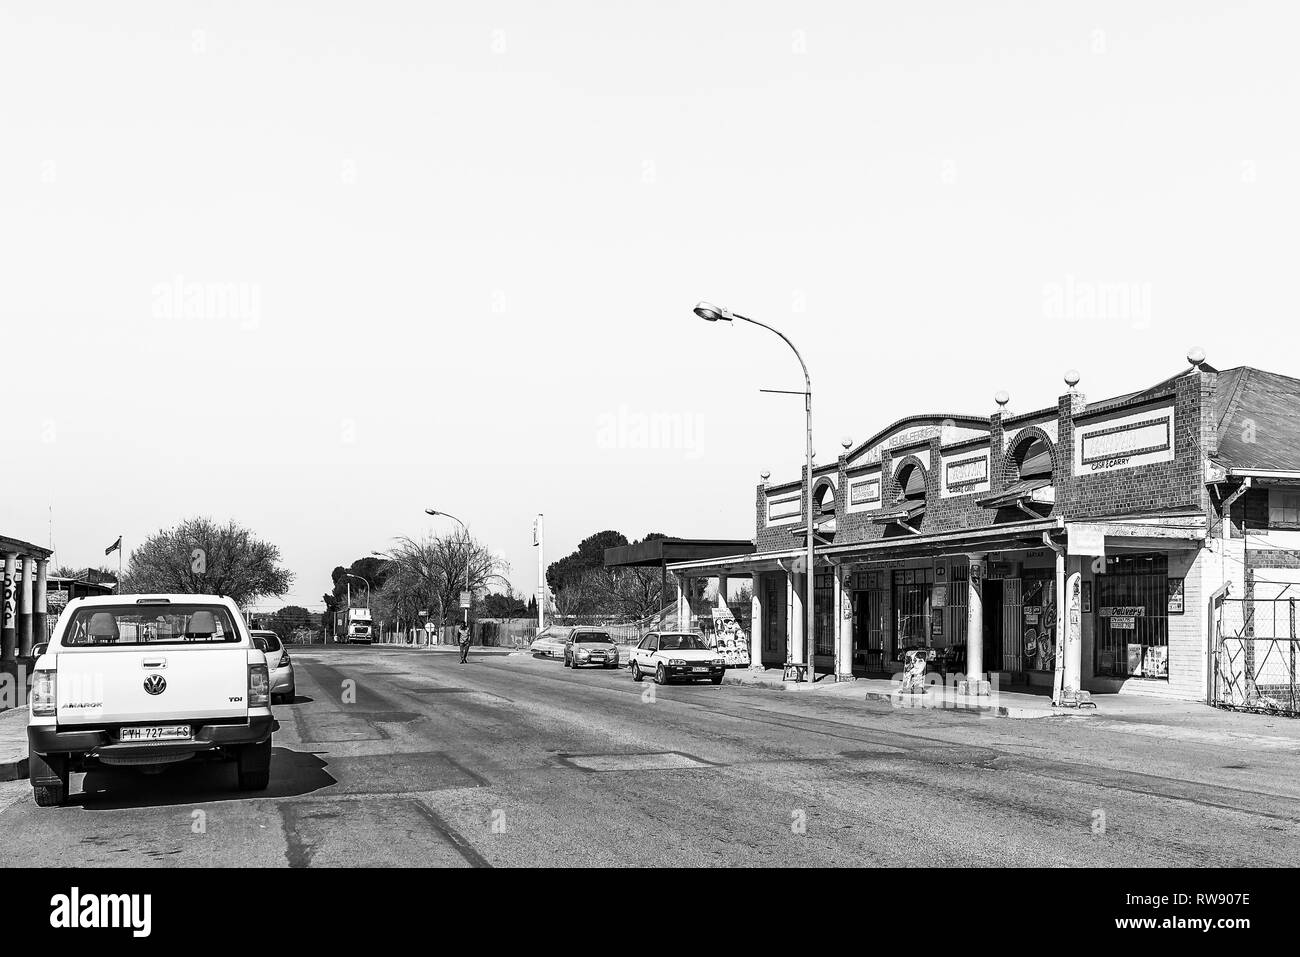 KOPPIES, SOUTH AFRICA, JULY 30, 2018: A street scene, with businesses and vehicles, in Koppies, a town in the Free State Province of South Africa. Mon Stock Photo